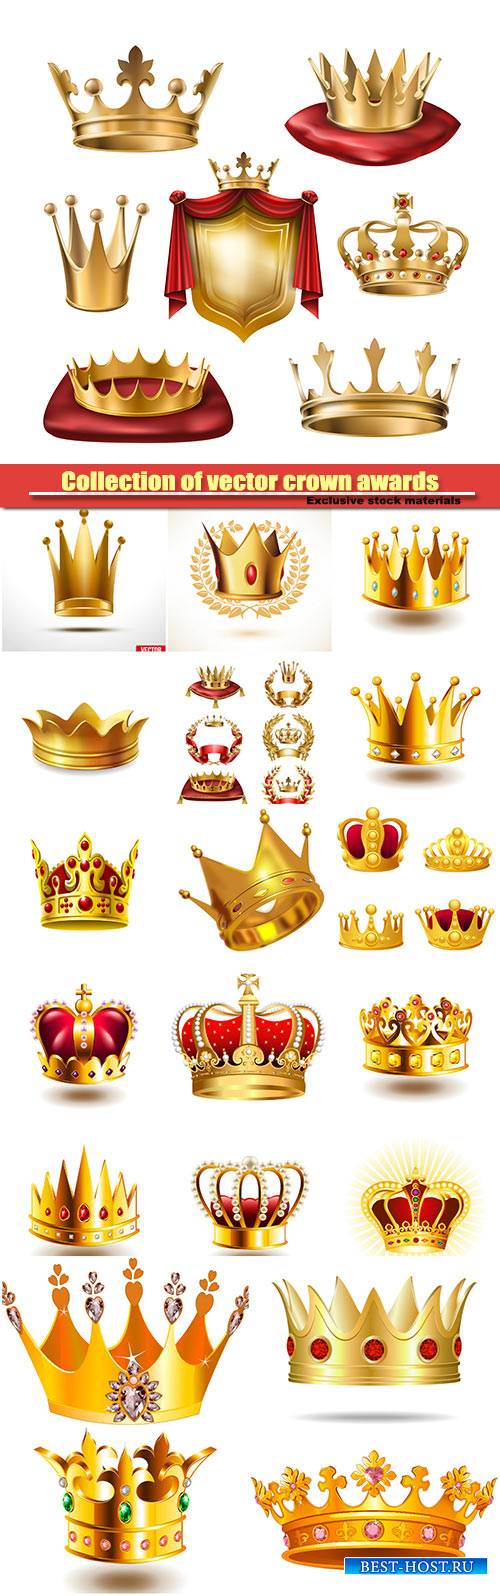 Collection of vector crown awards for winners of competitions, design elements for a label, certificate, diploma